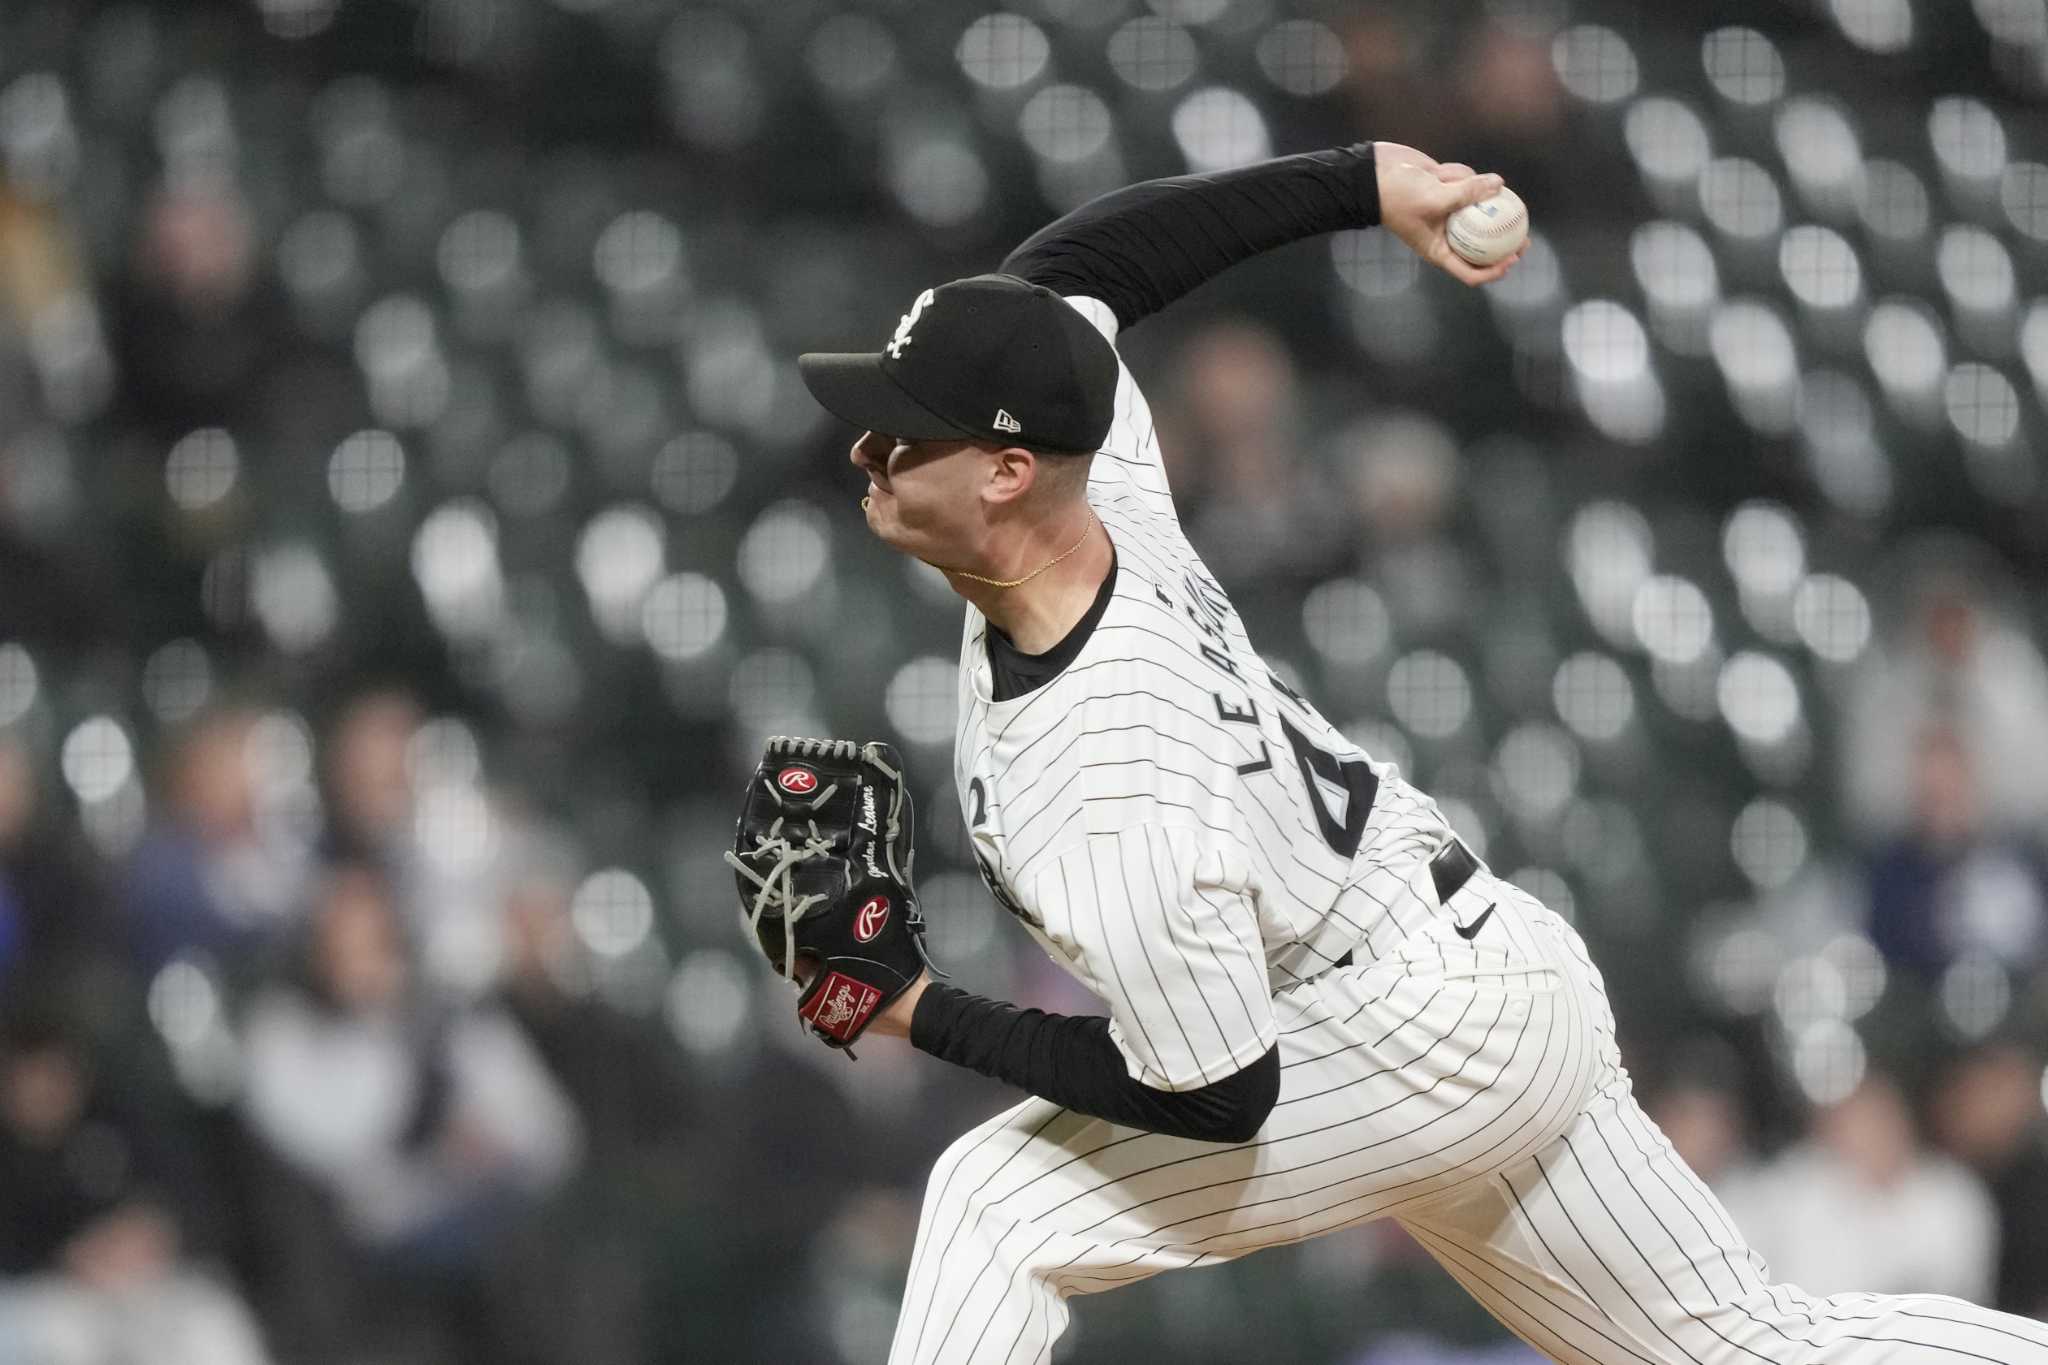 Jordan Leasure has become a high-leverage reliever and a bright spot for the last-place White Sox